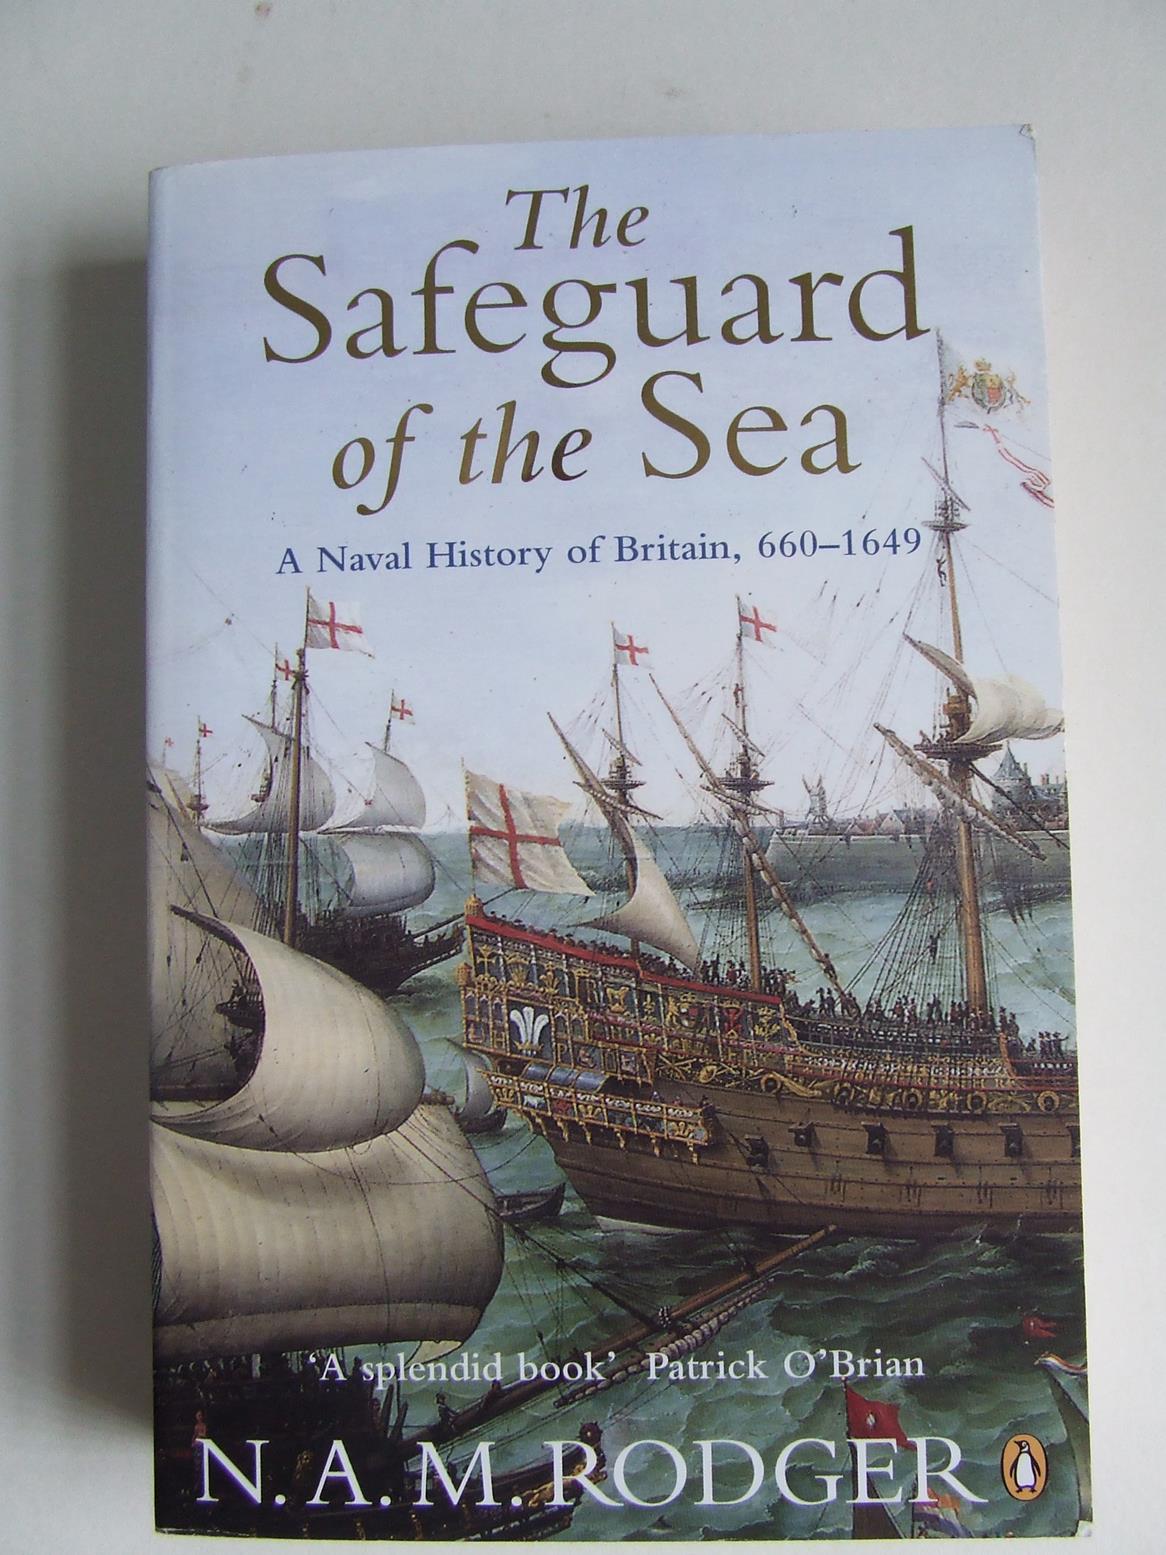 The Safeguard of the Sea. a naval history of Britain 660-1649